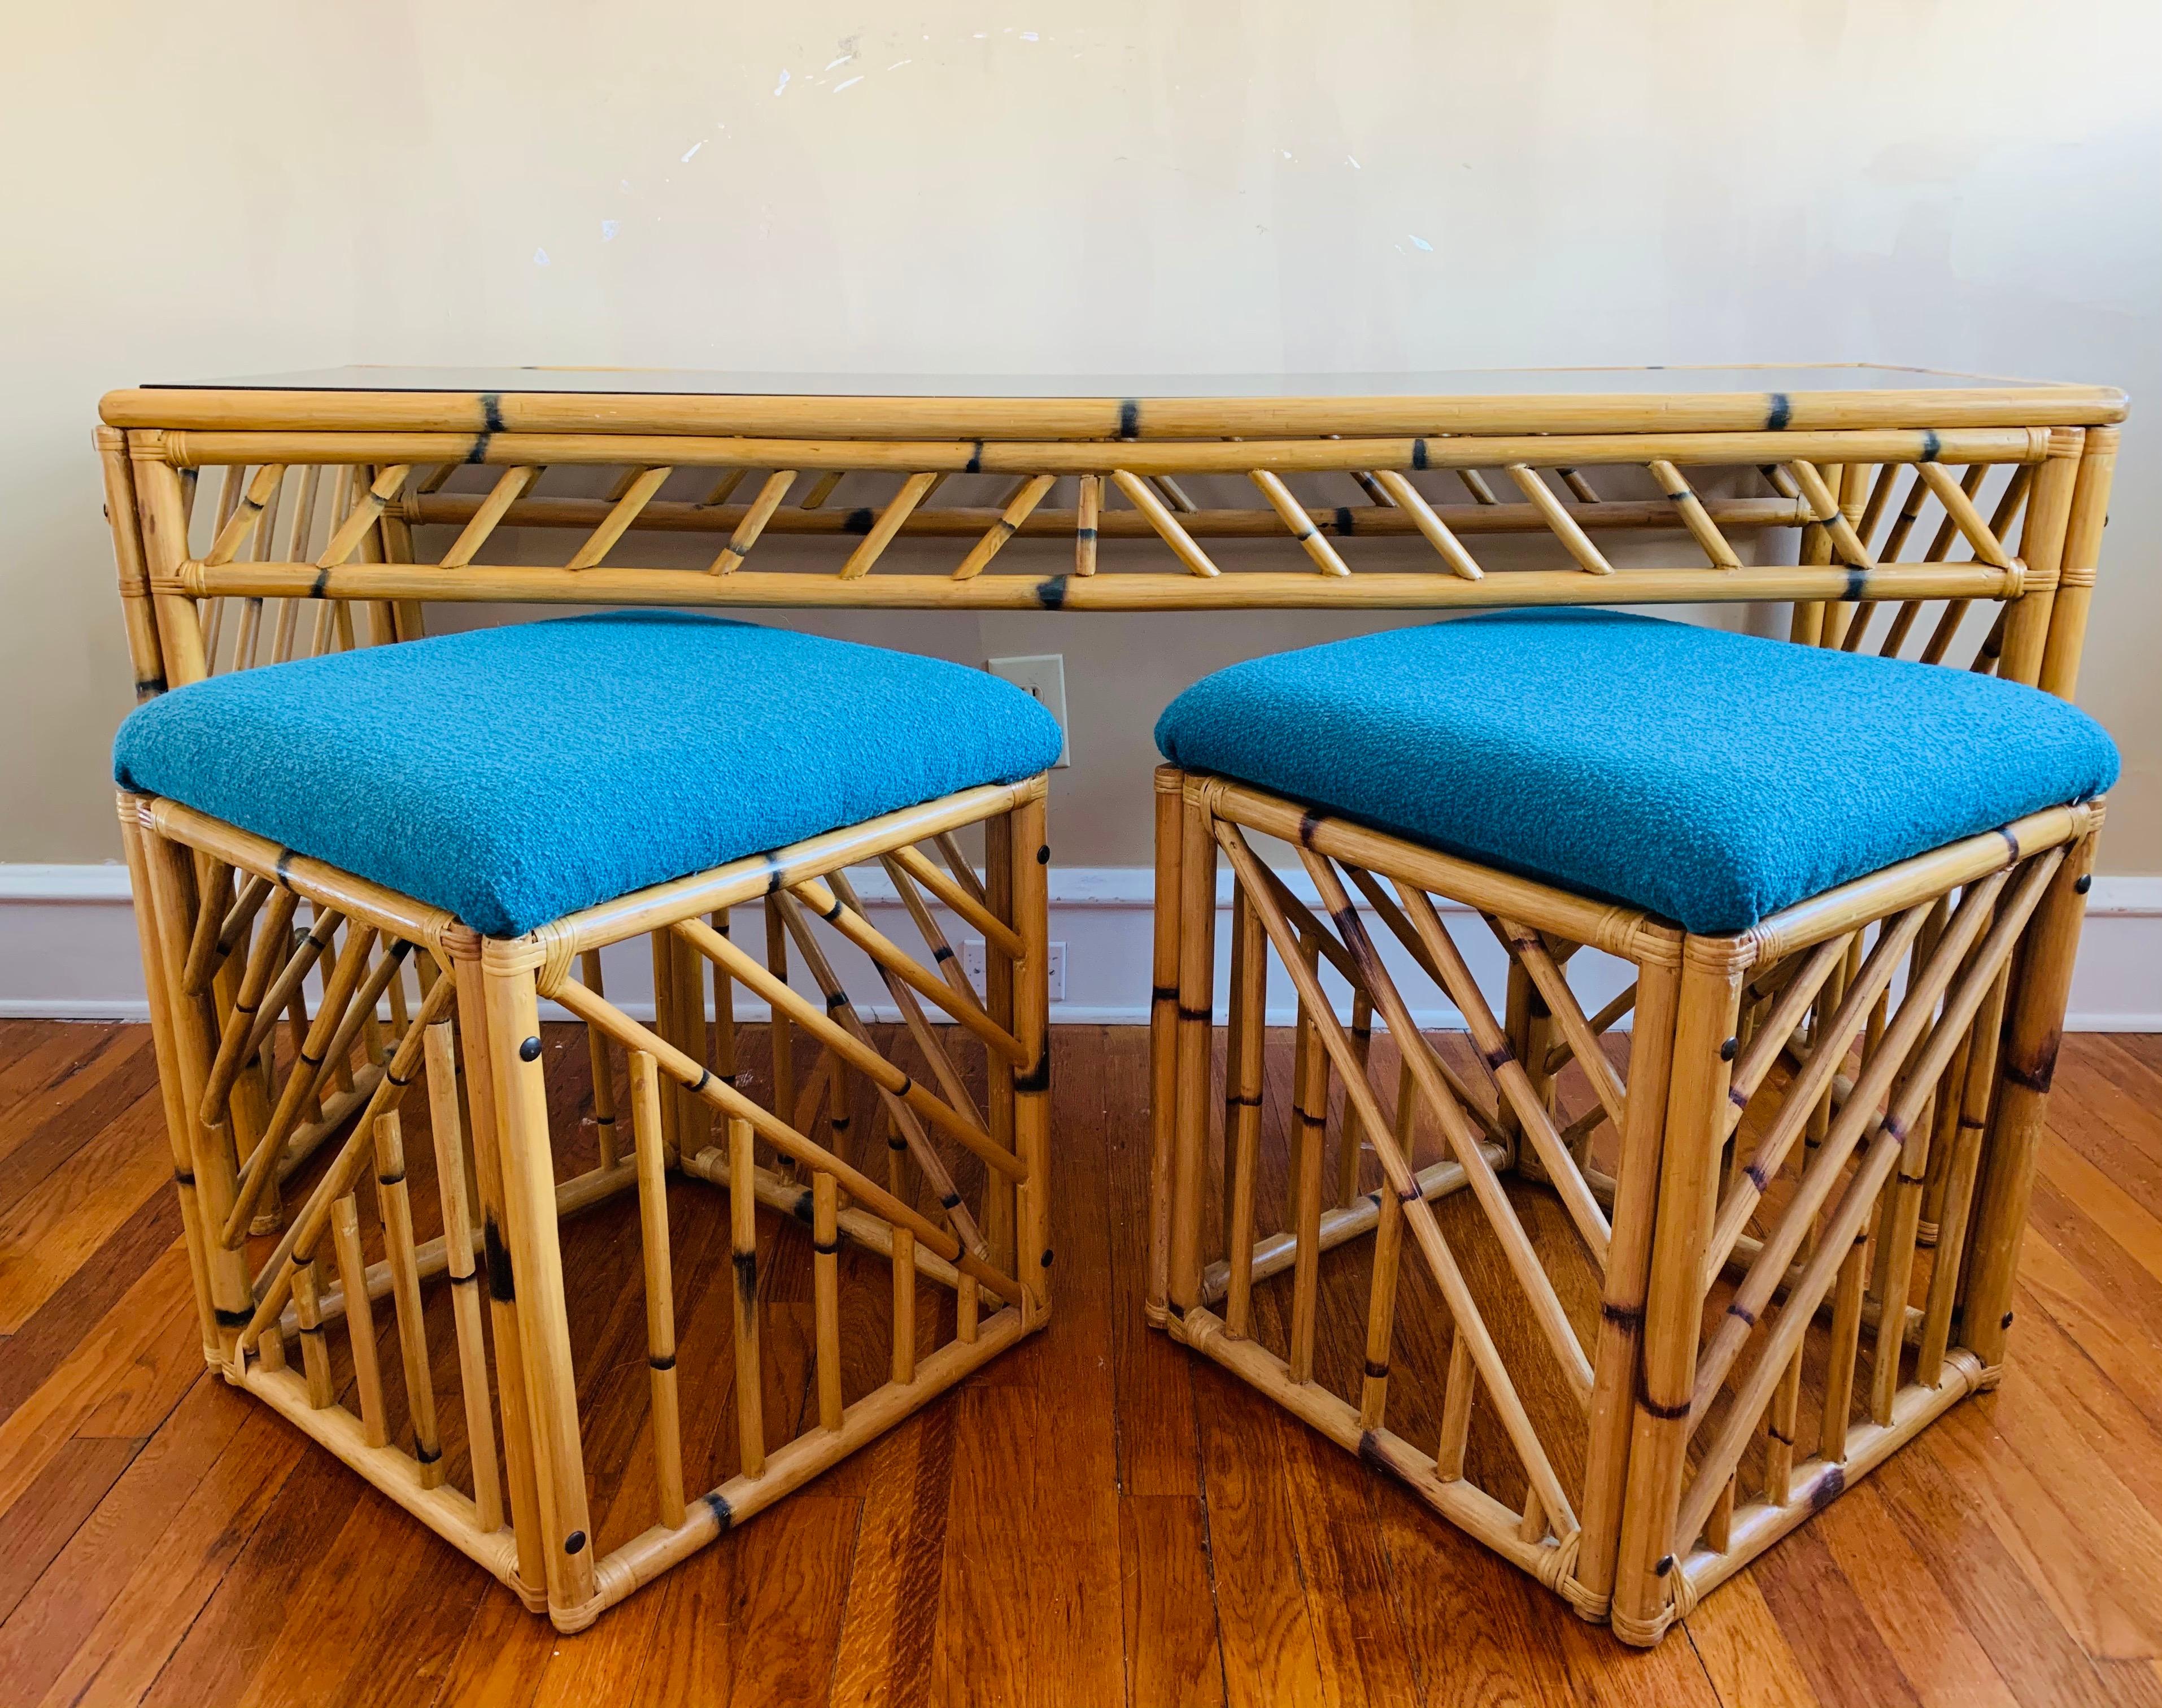 A charming console table, replete with coordinating stools. 

This set is clean & solid, and is ready to be placed in its new home. 

Many of the vintage bamboo/rattan pieces you'll find are a bit more dusty & worn, as these pieces were commonly